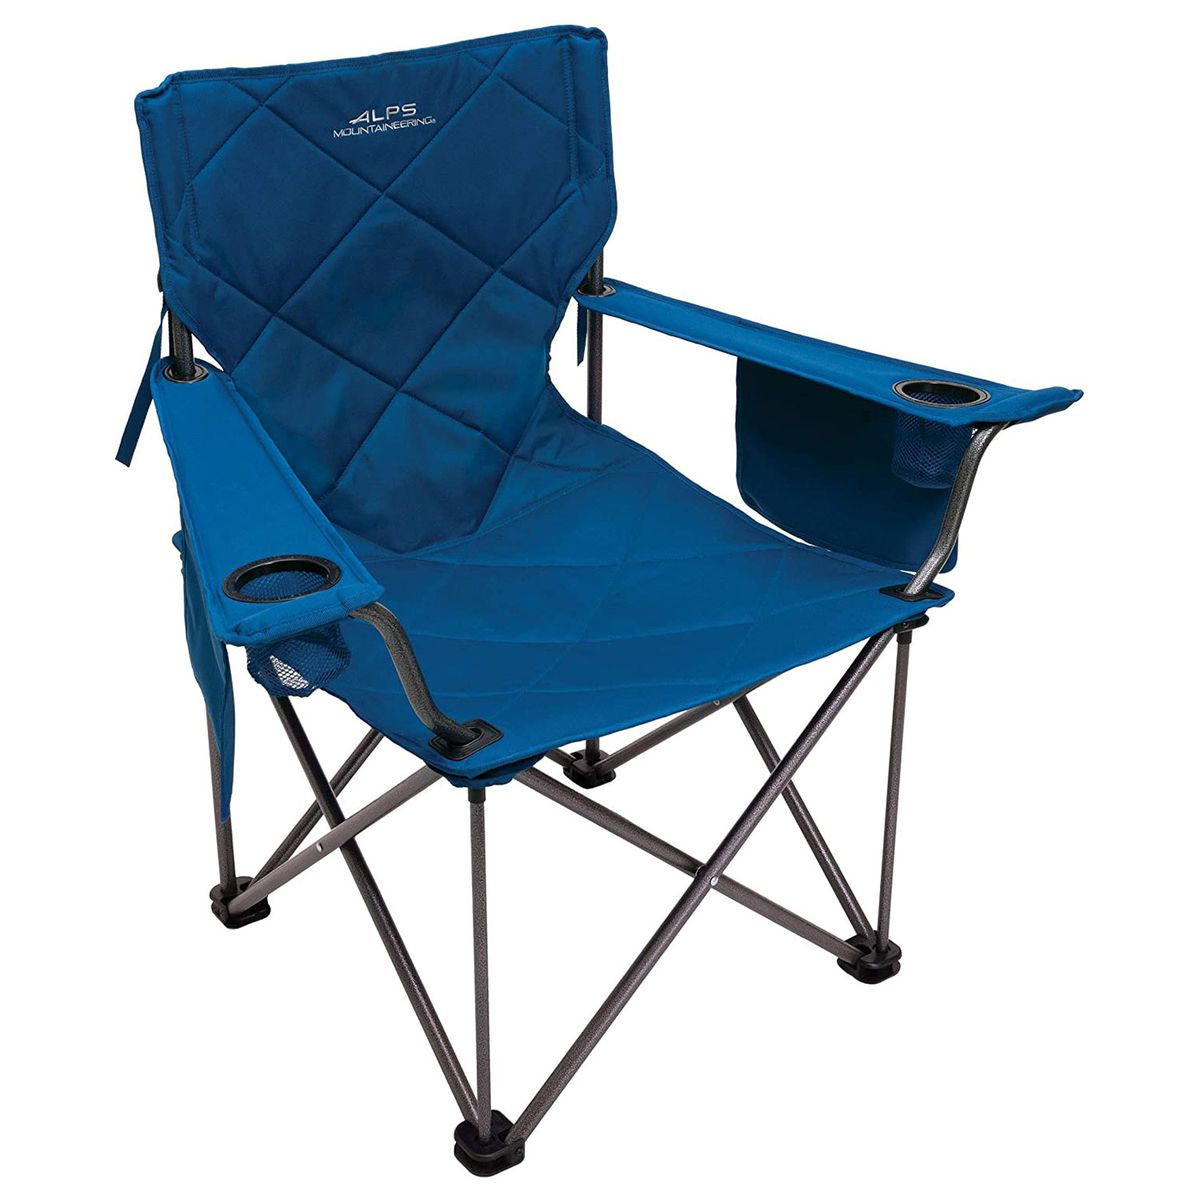 Best for Lots of Room: Alps Mountaineering King Kong Chair